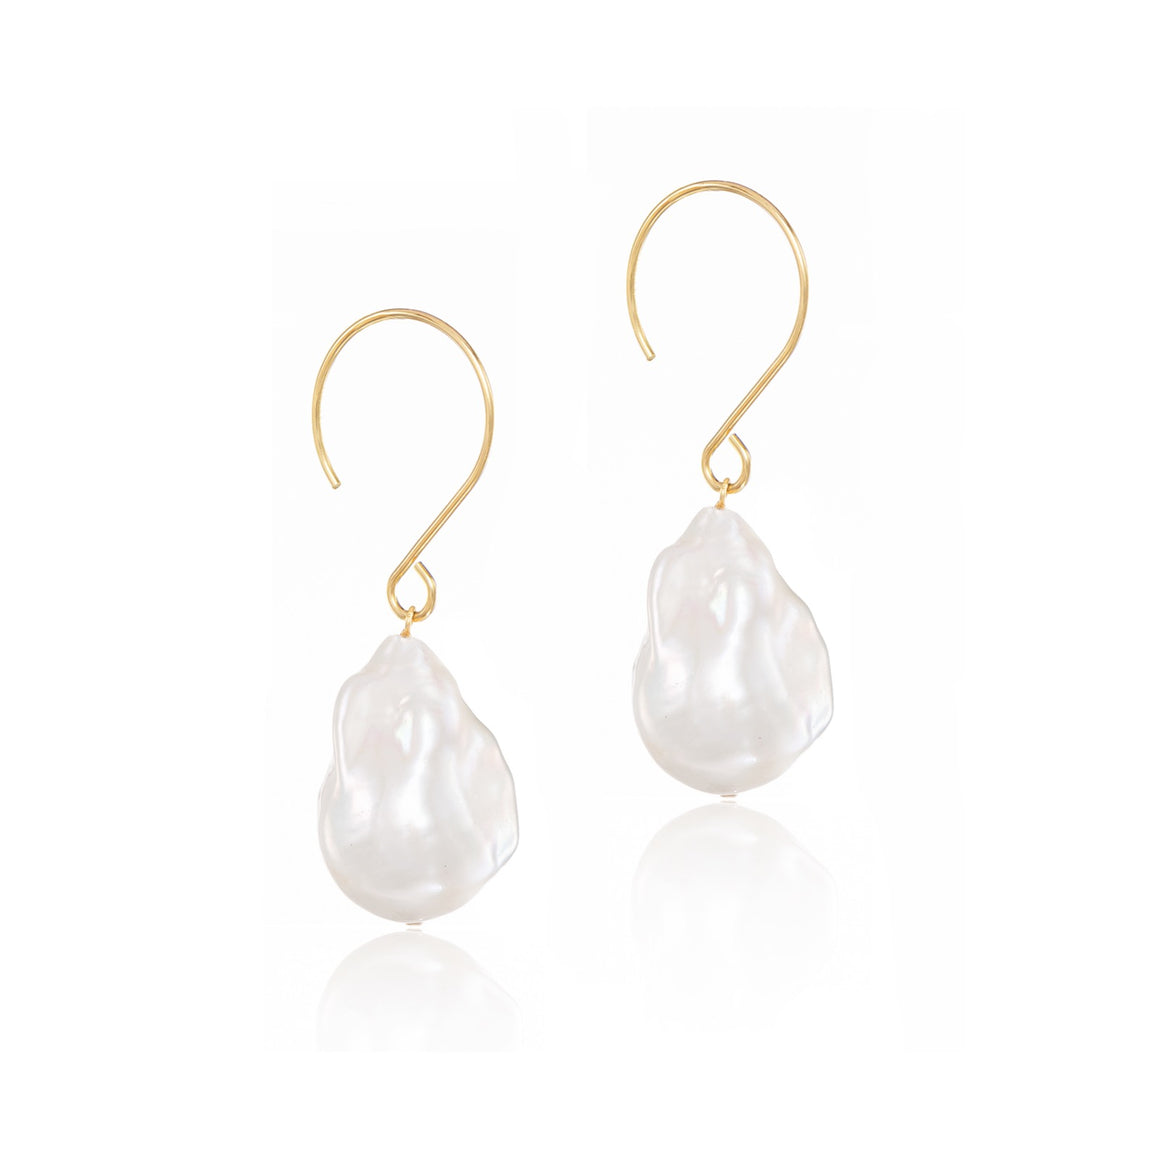 Tiny Treasures Large White Baroque Freshwater Pearl French Wire Earrings In 14K Yellow Gold Filled